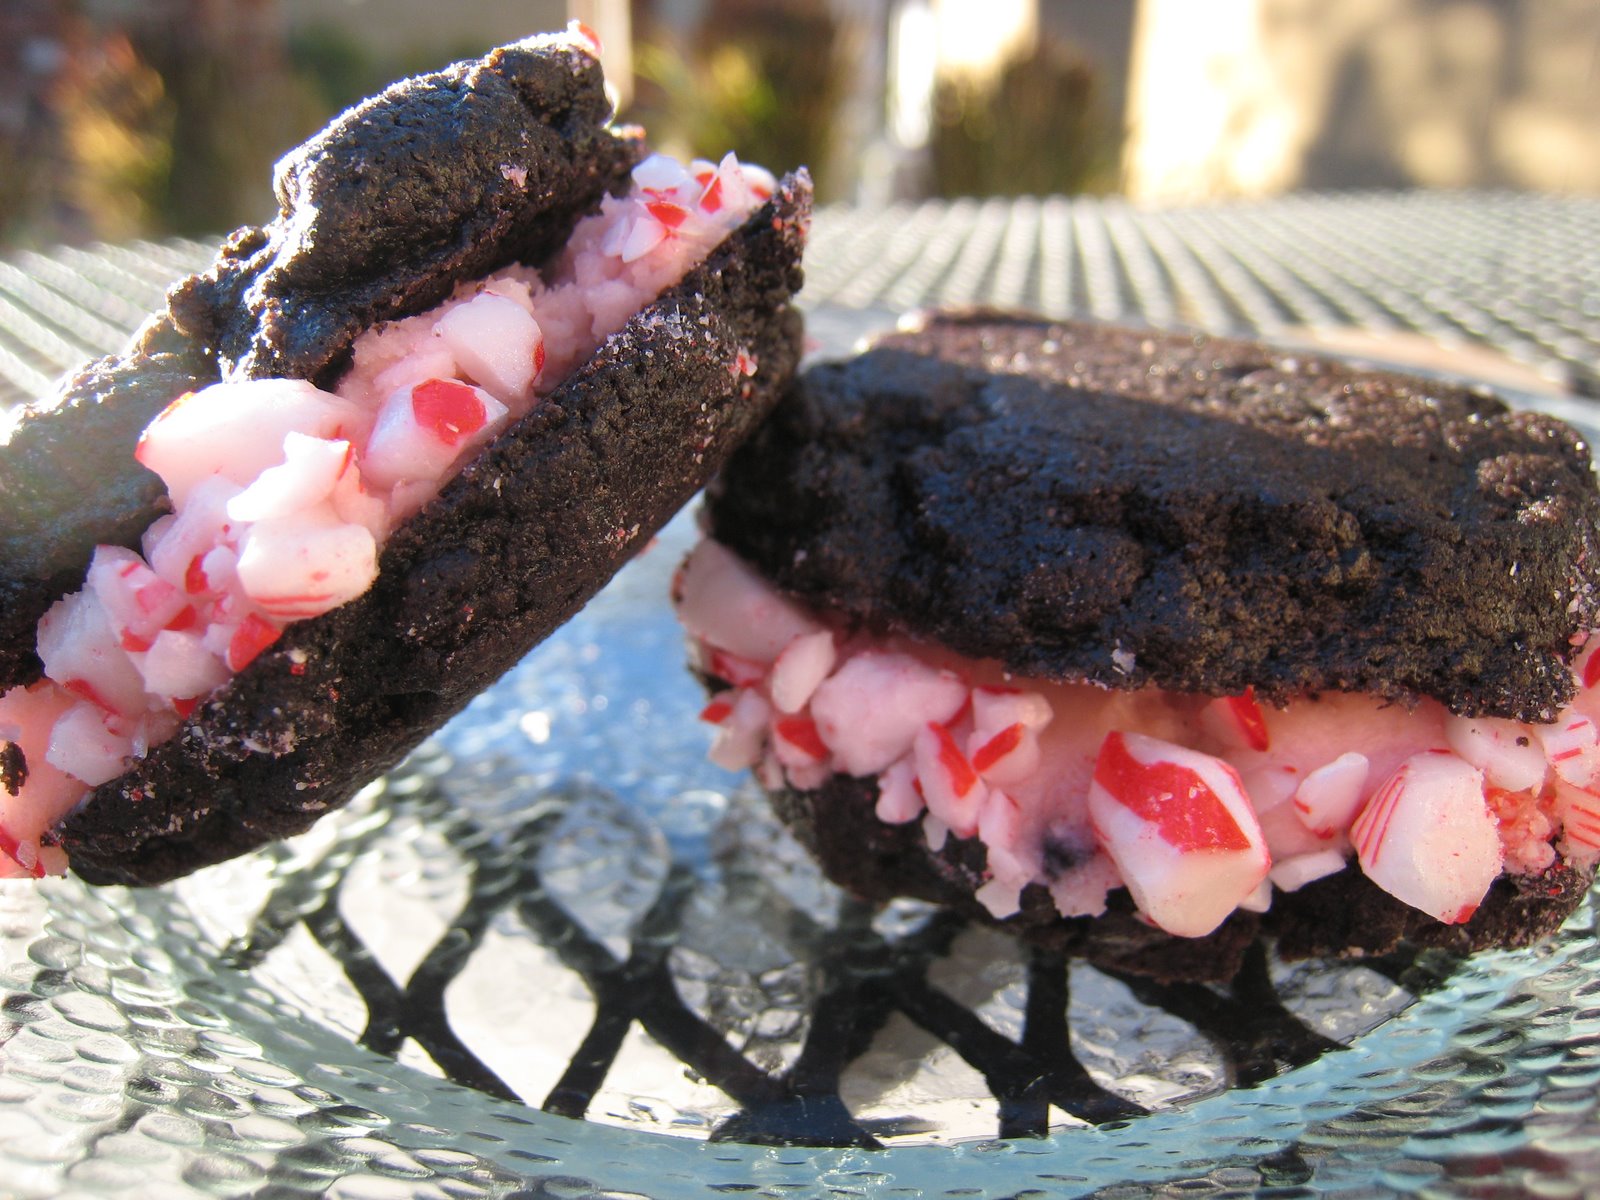 chocolate candy cane cookies